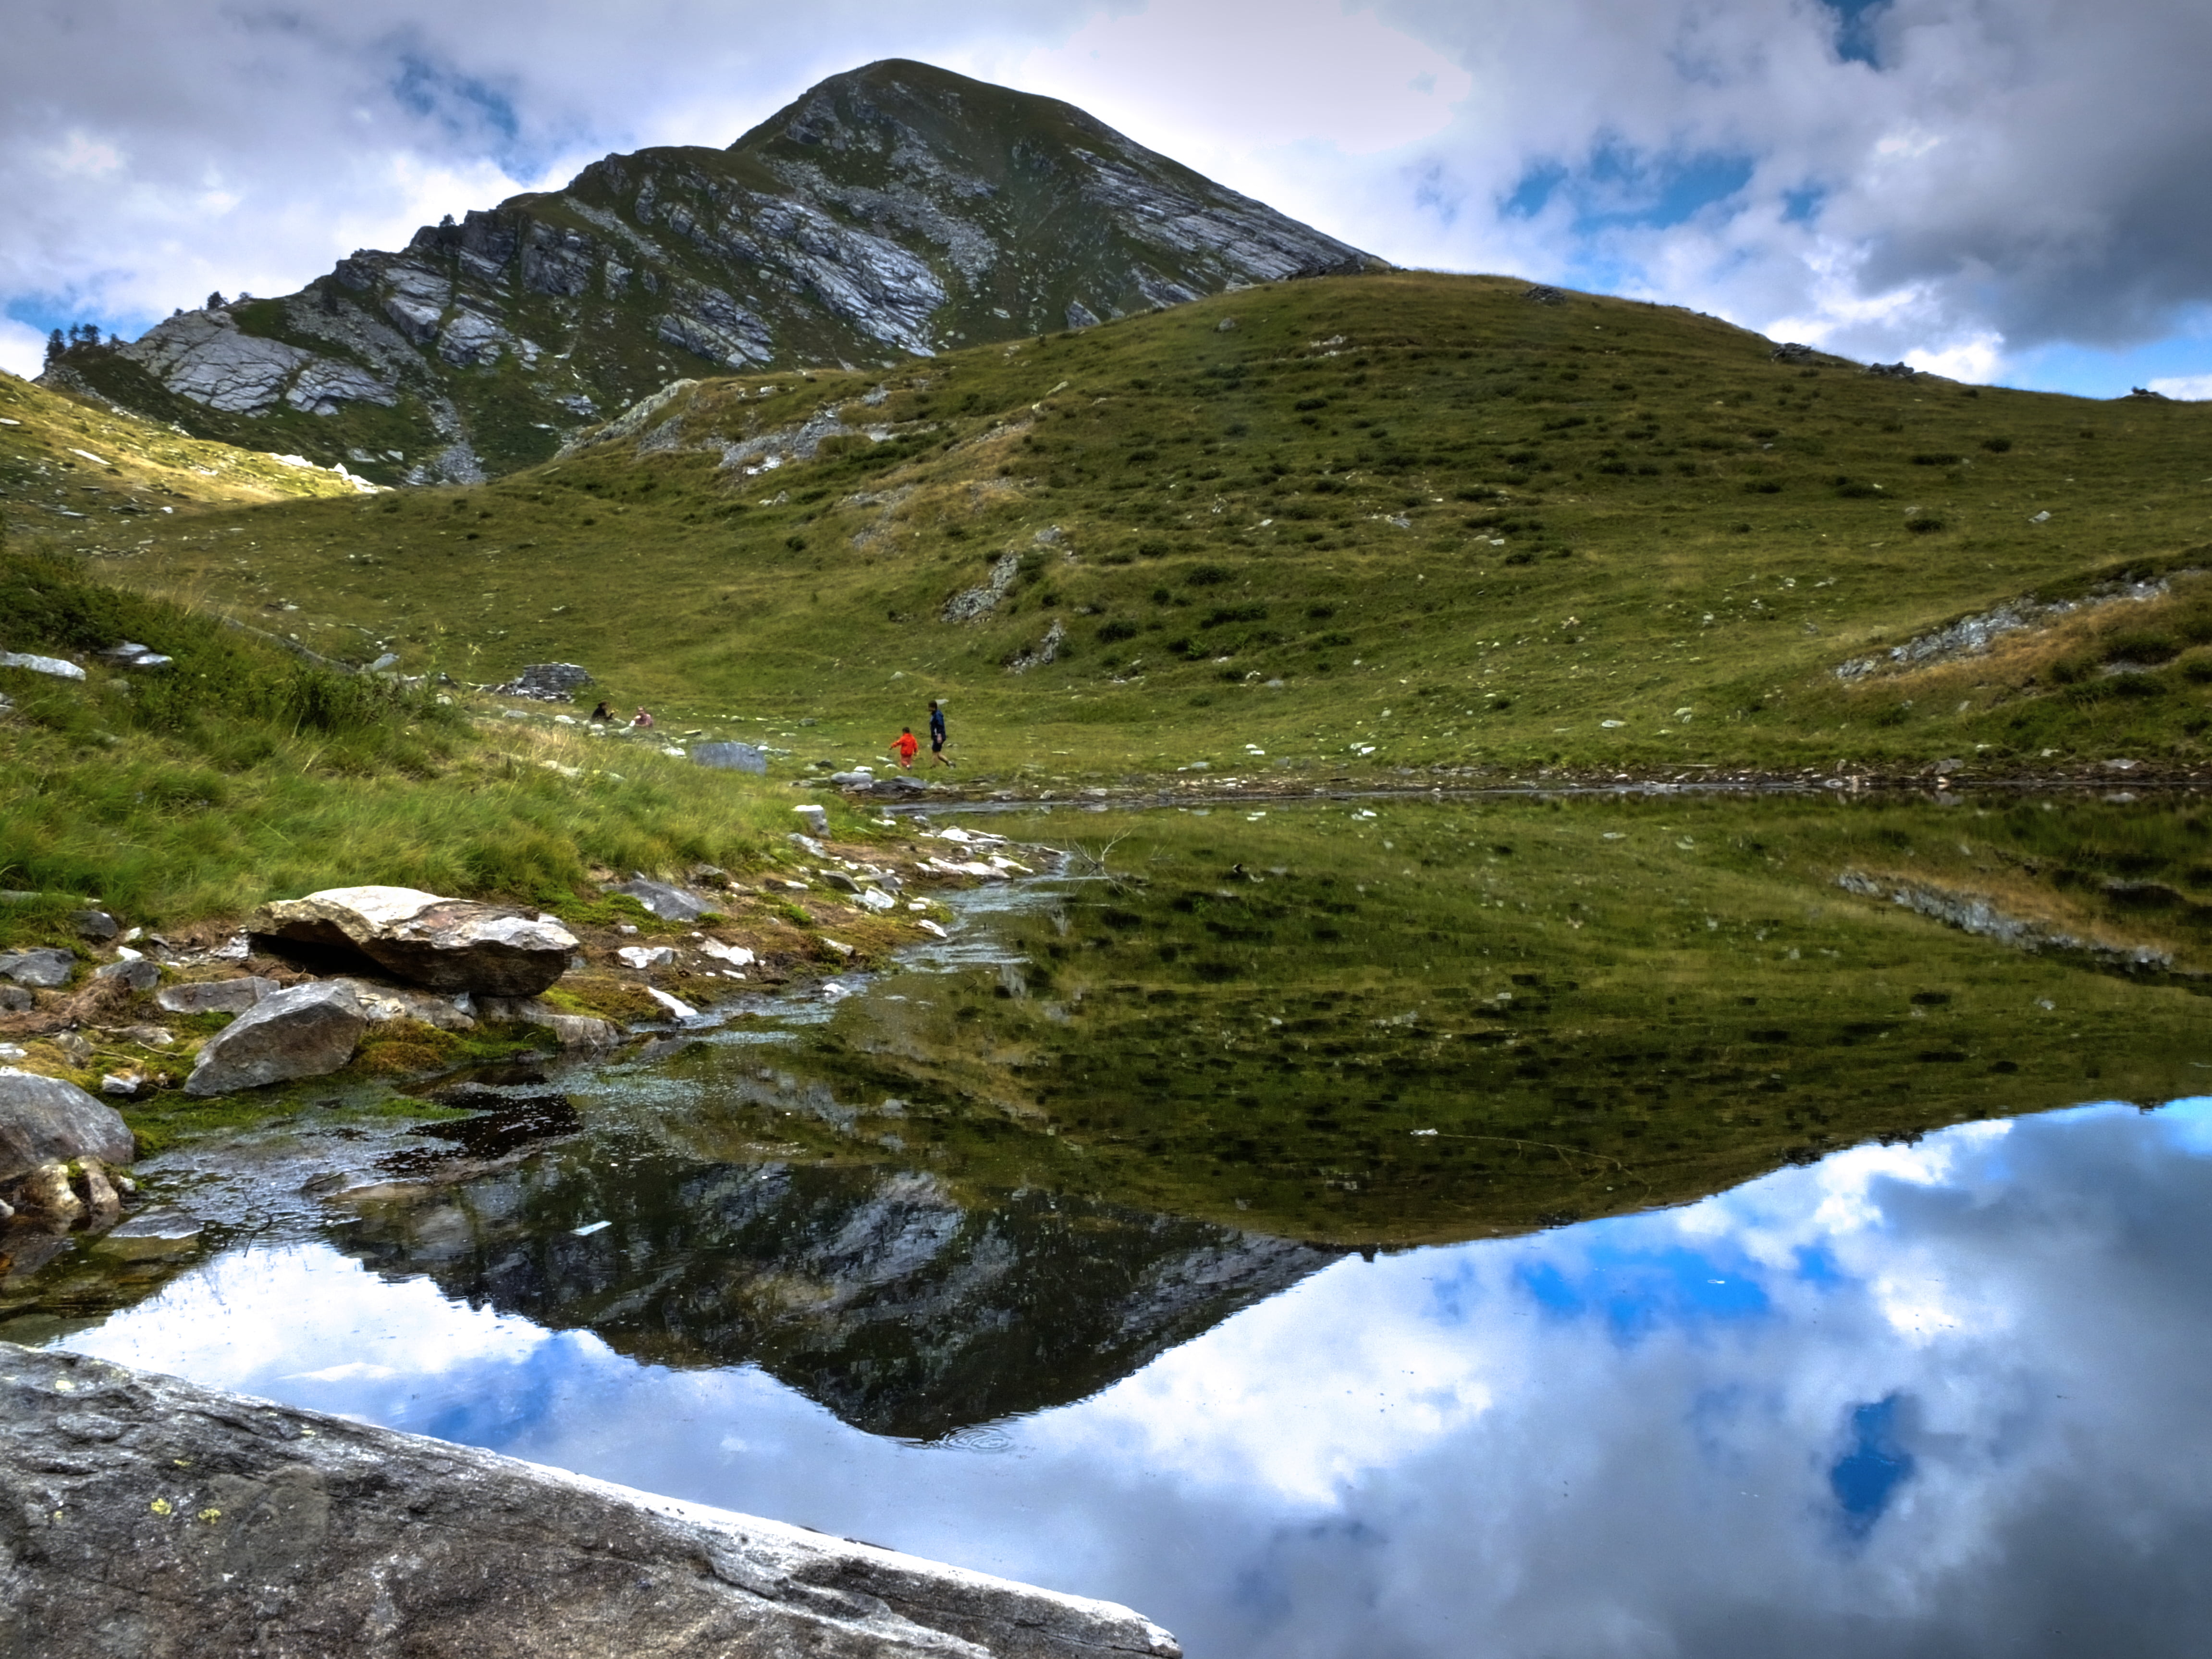 time lapse photo of body of water beside mountain, Mirror, montagna